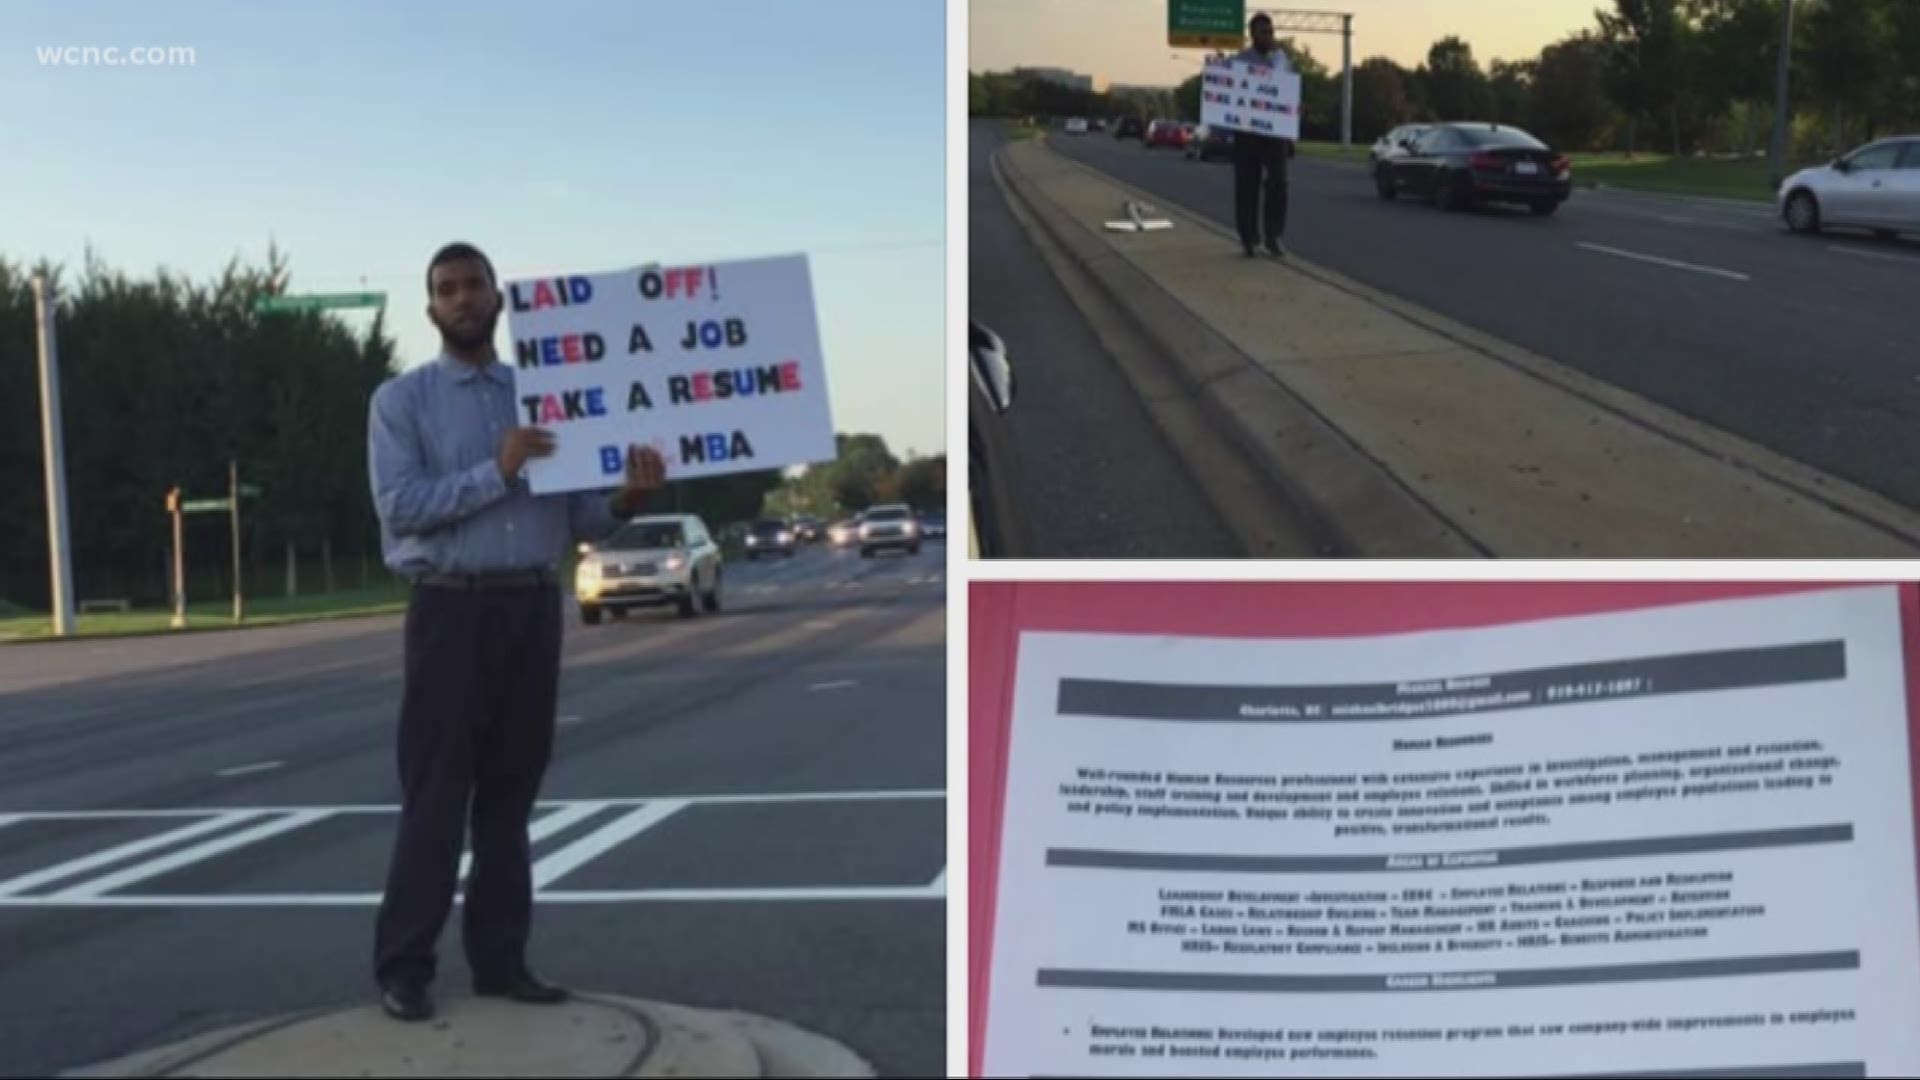 At first glance, you might not Michael Bridges a second look -- just another person standing on a Charlotte street corner holding a sign.